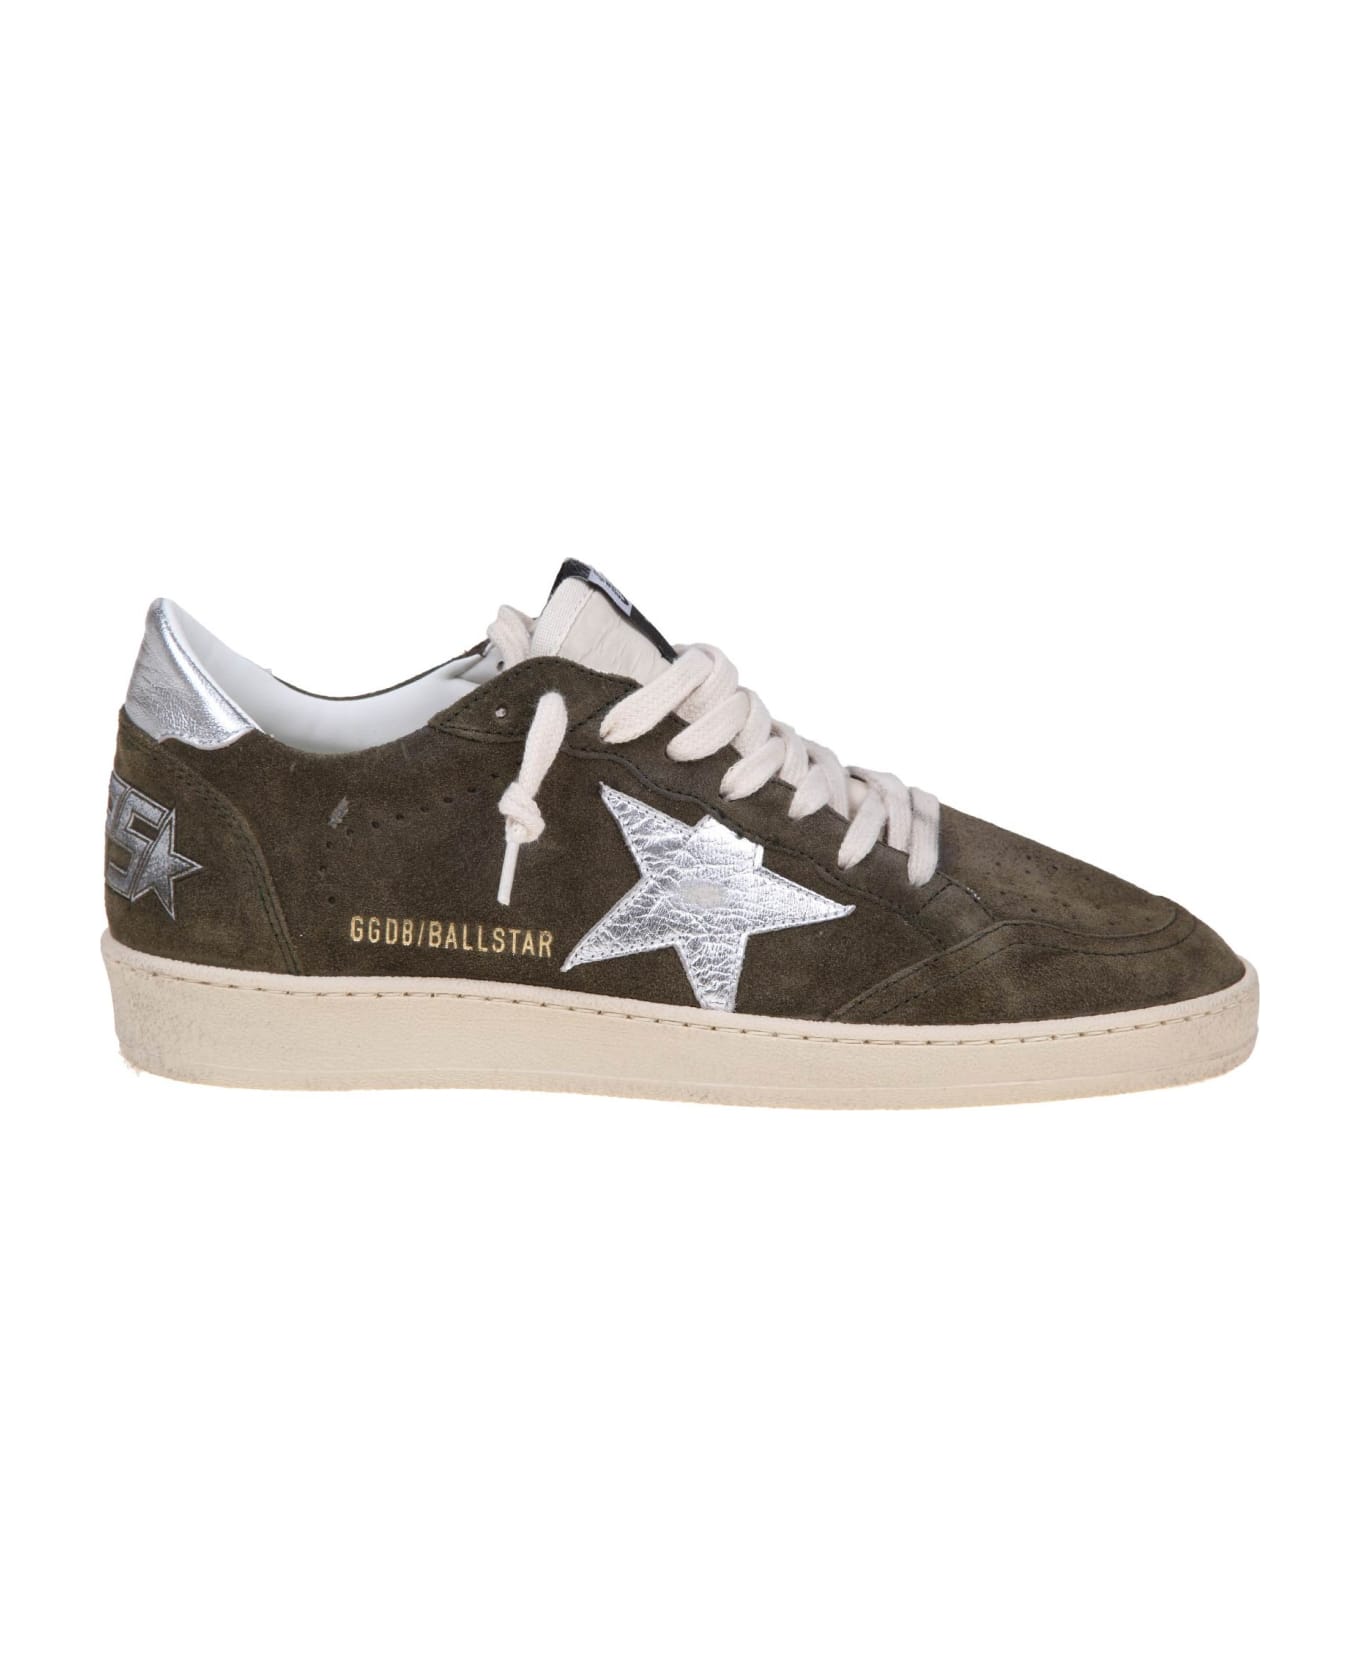 Golden Goose Ball Star Sneakers - Olive